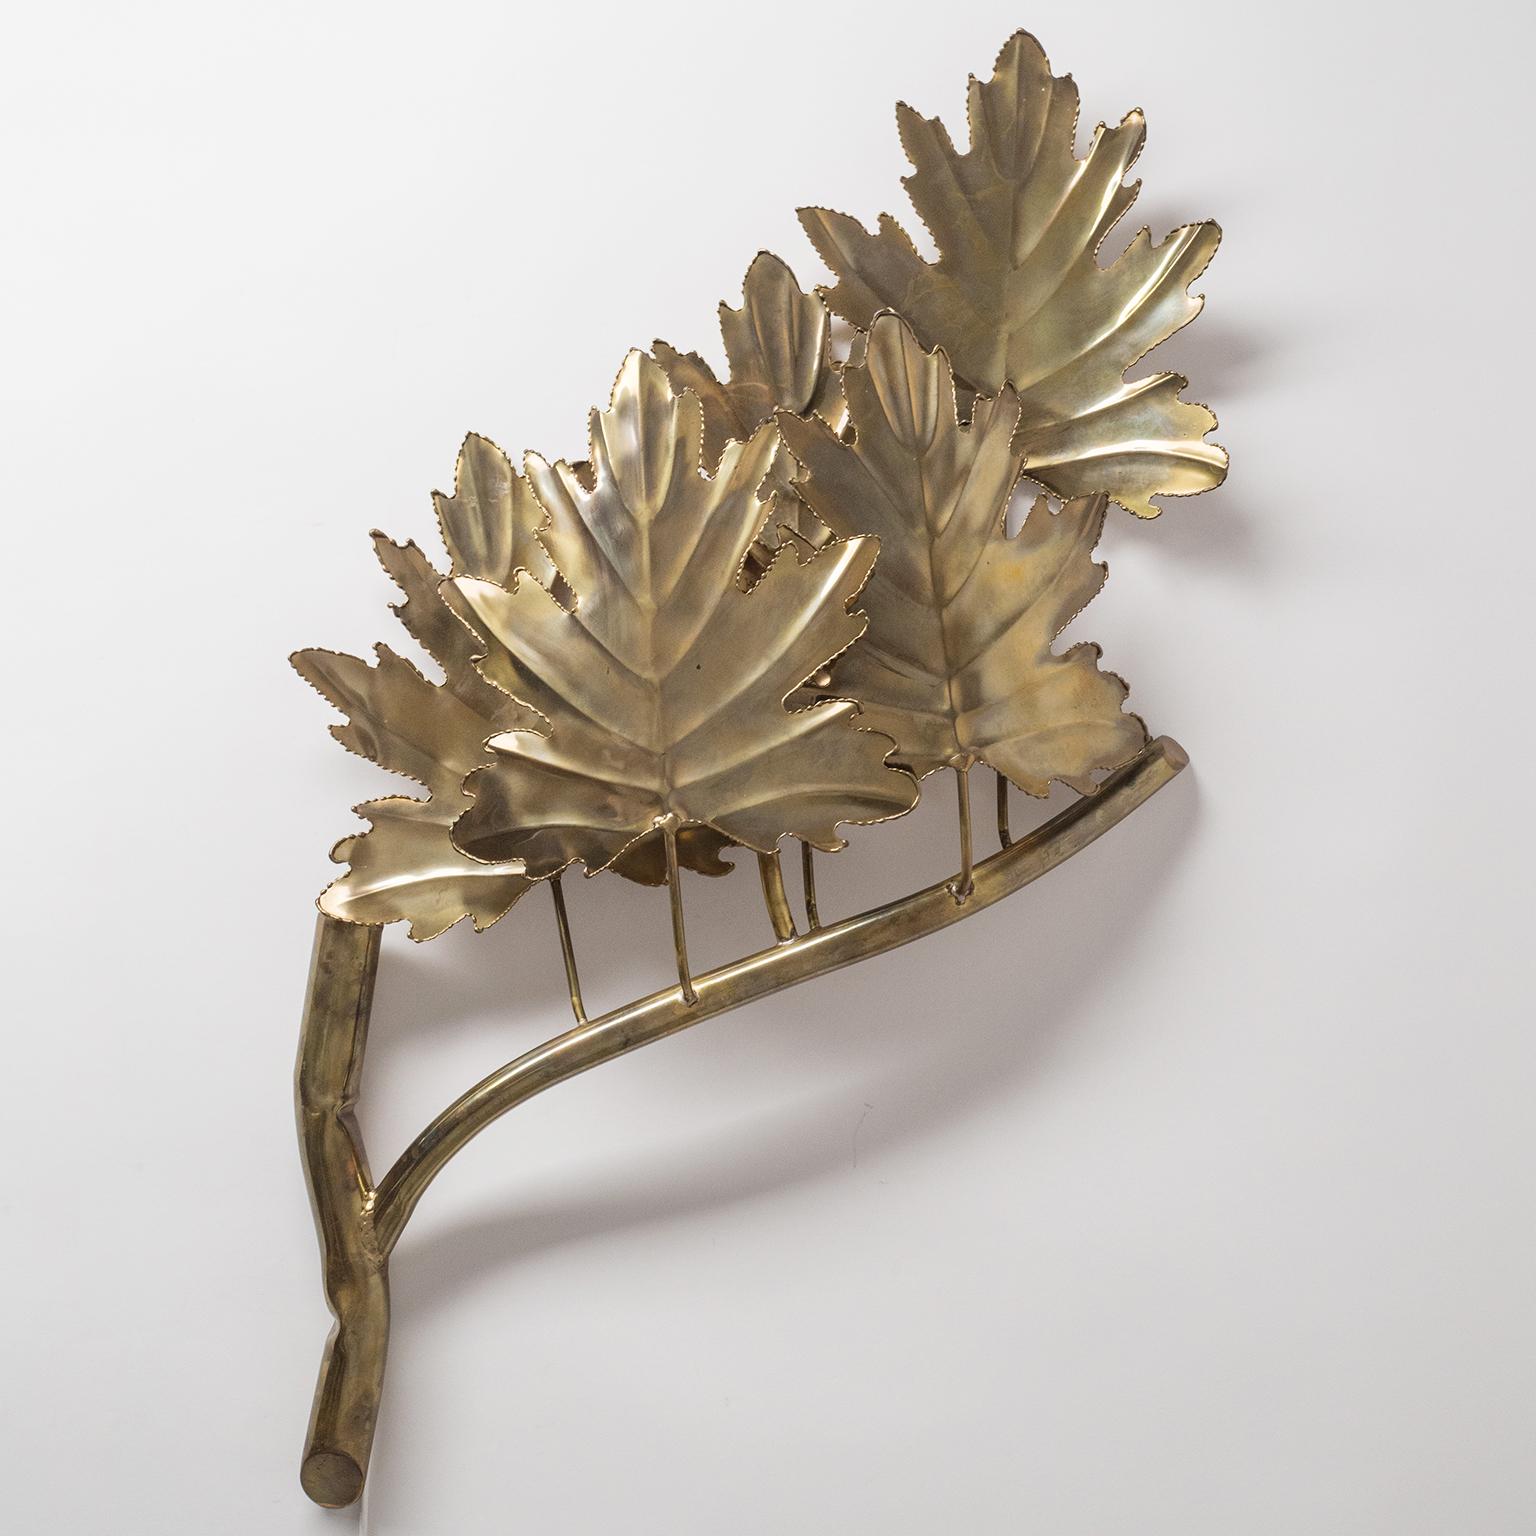 Unique French oversize wall light from the 1970-1980s. Very sculptural piece in the shape of a stylized maple branch with leaves. One brass E27 socket with new wiring.